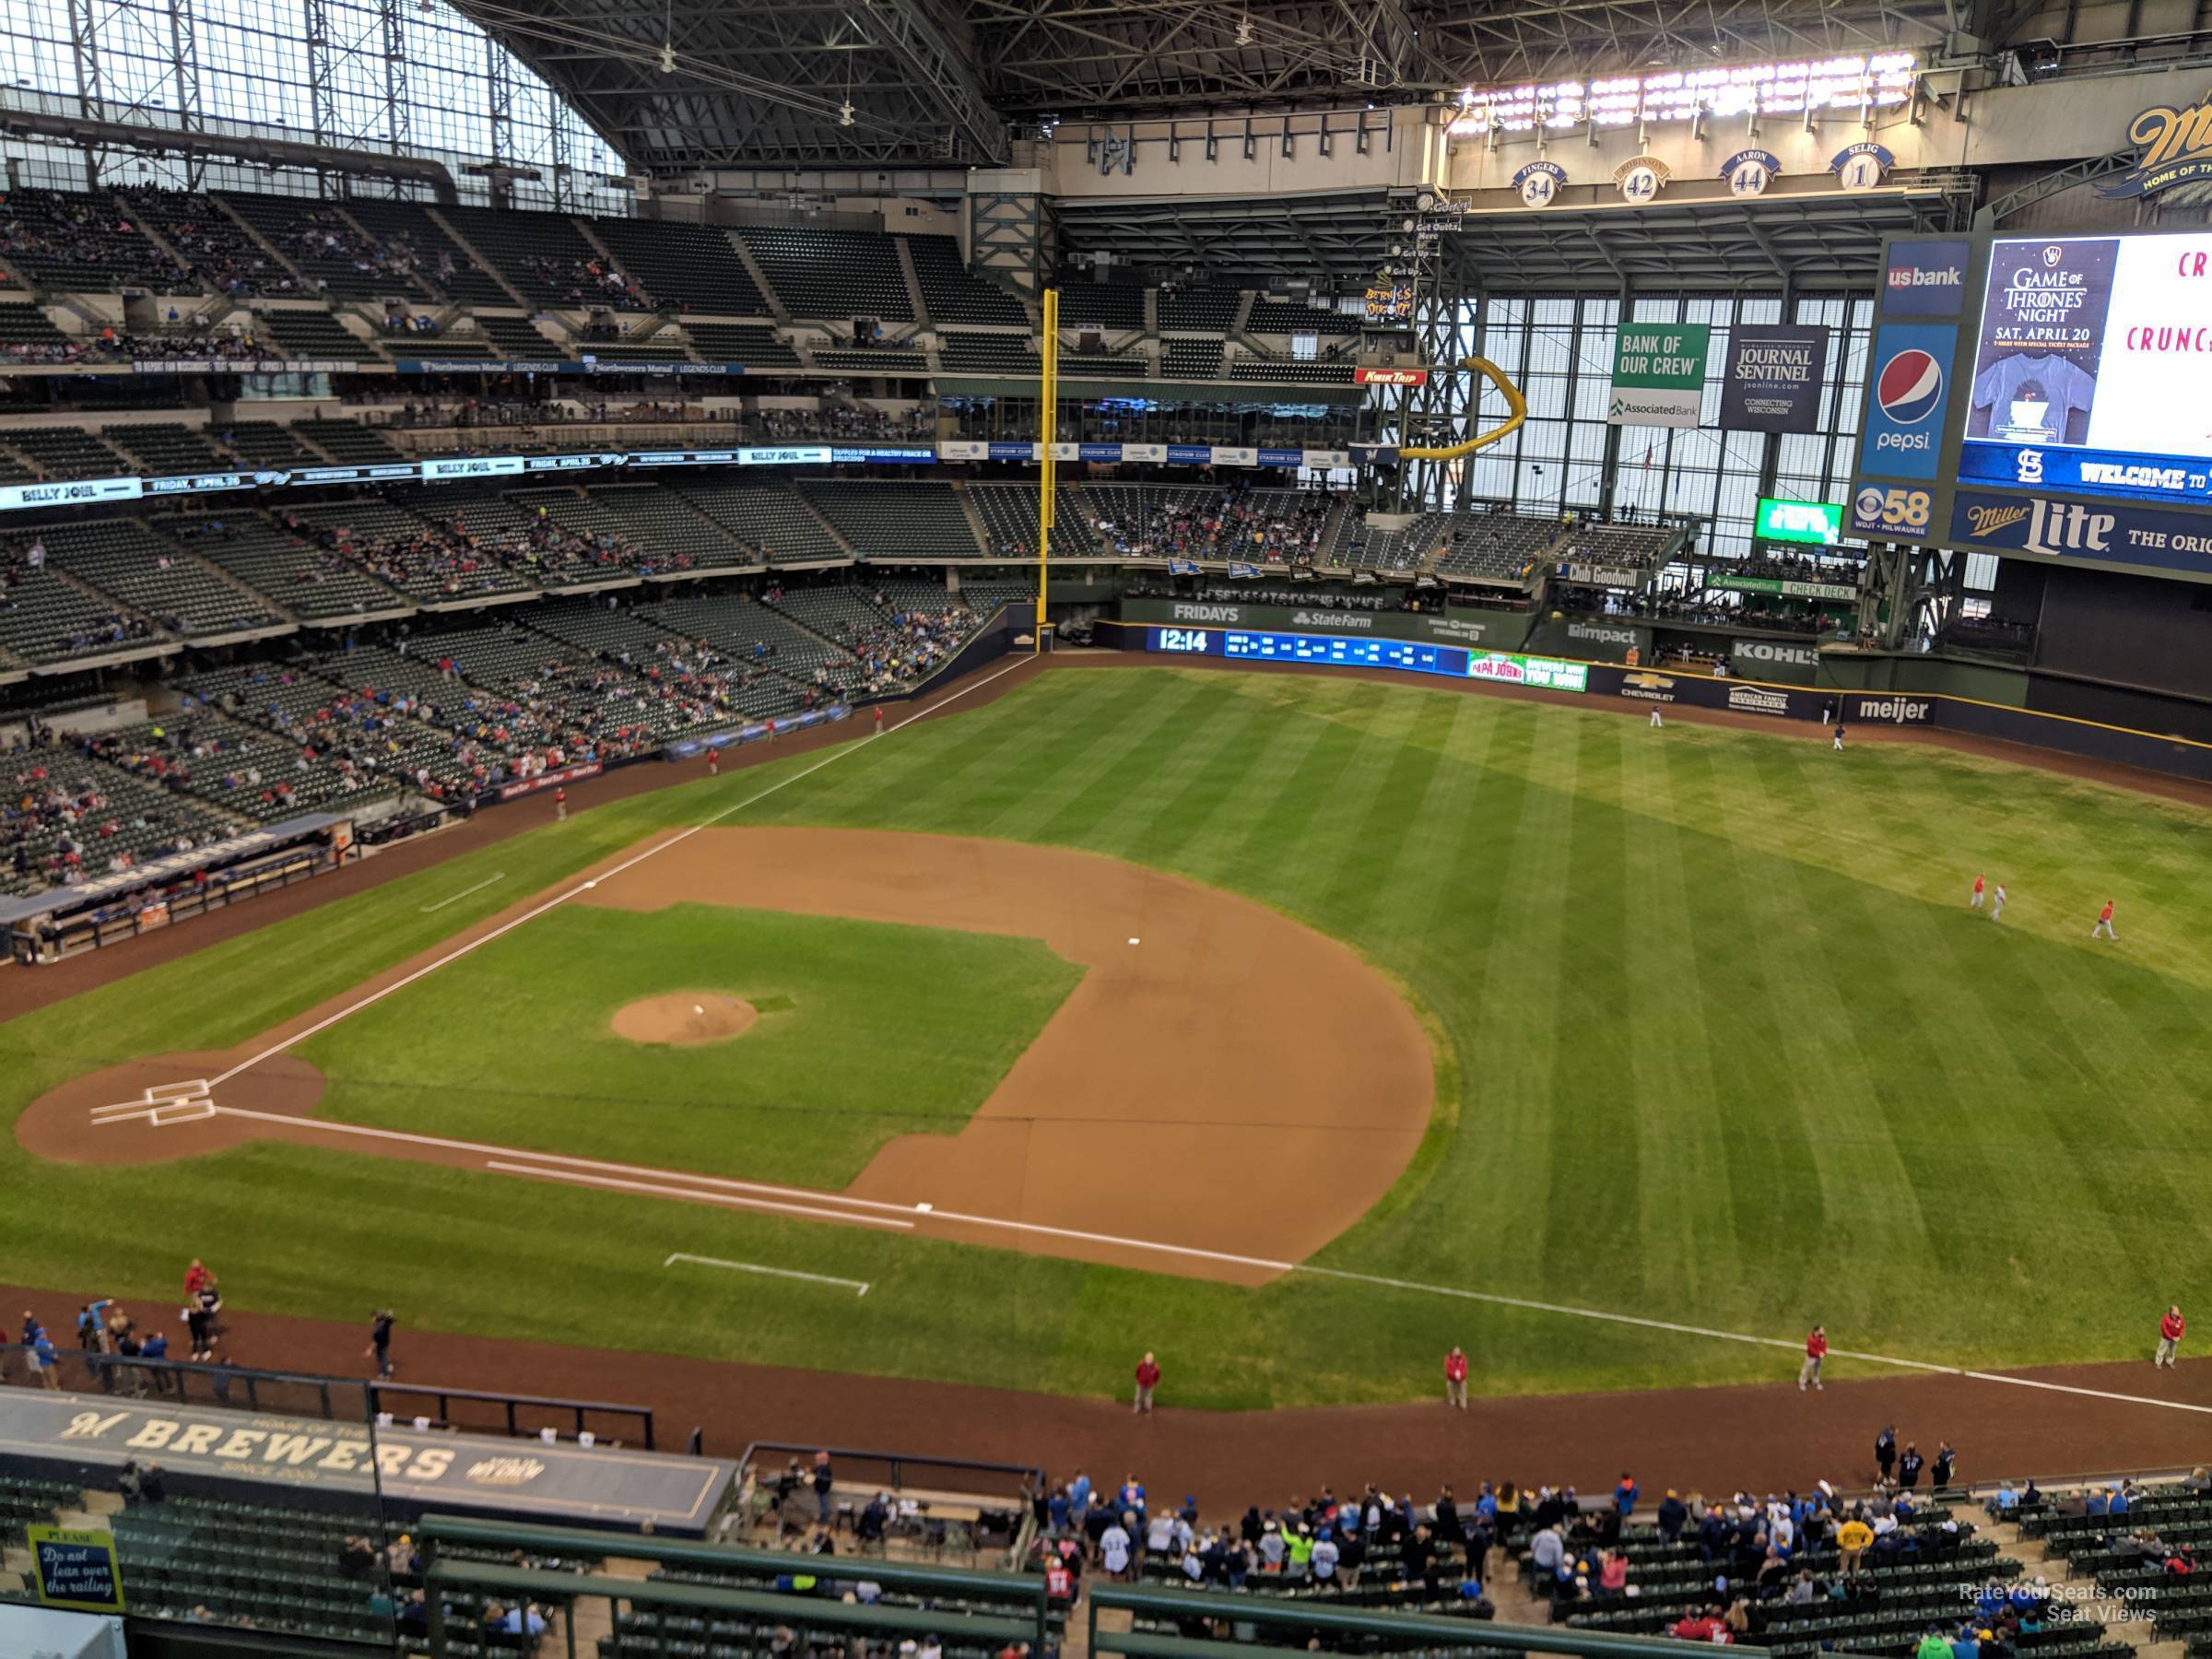 County Stadium / Miller Park – The Sigma Group